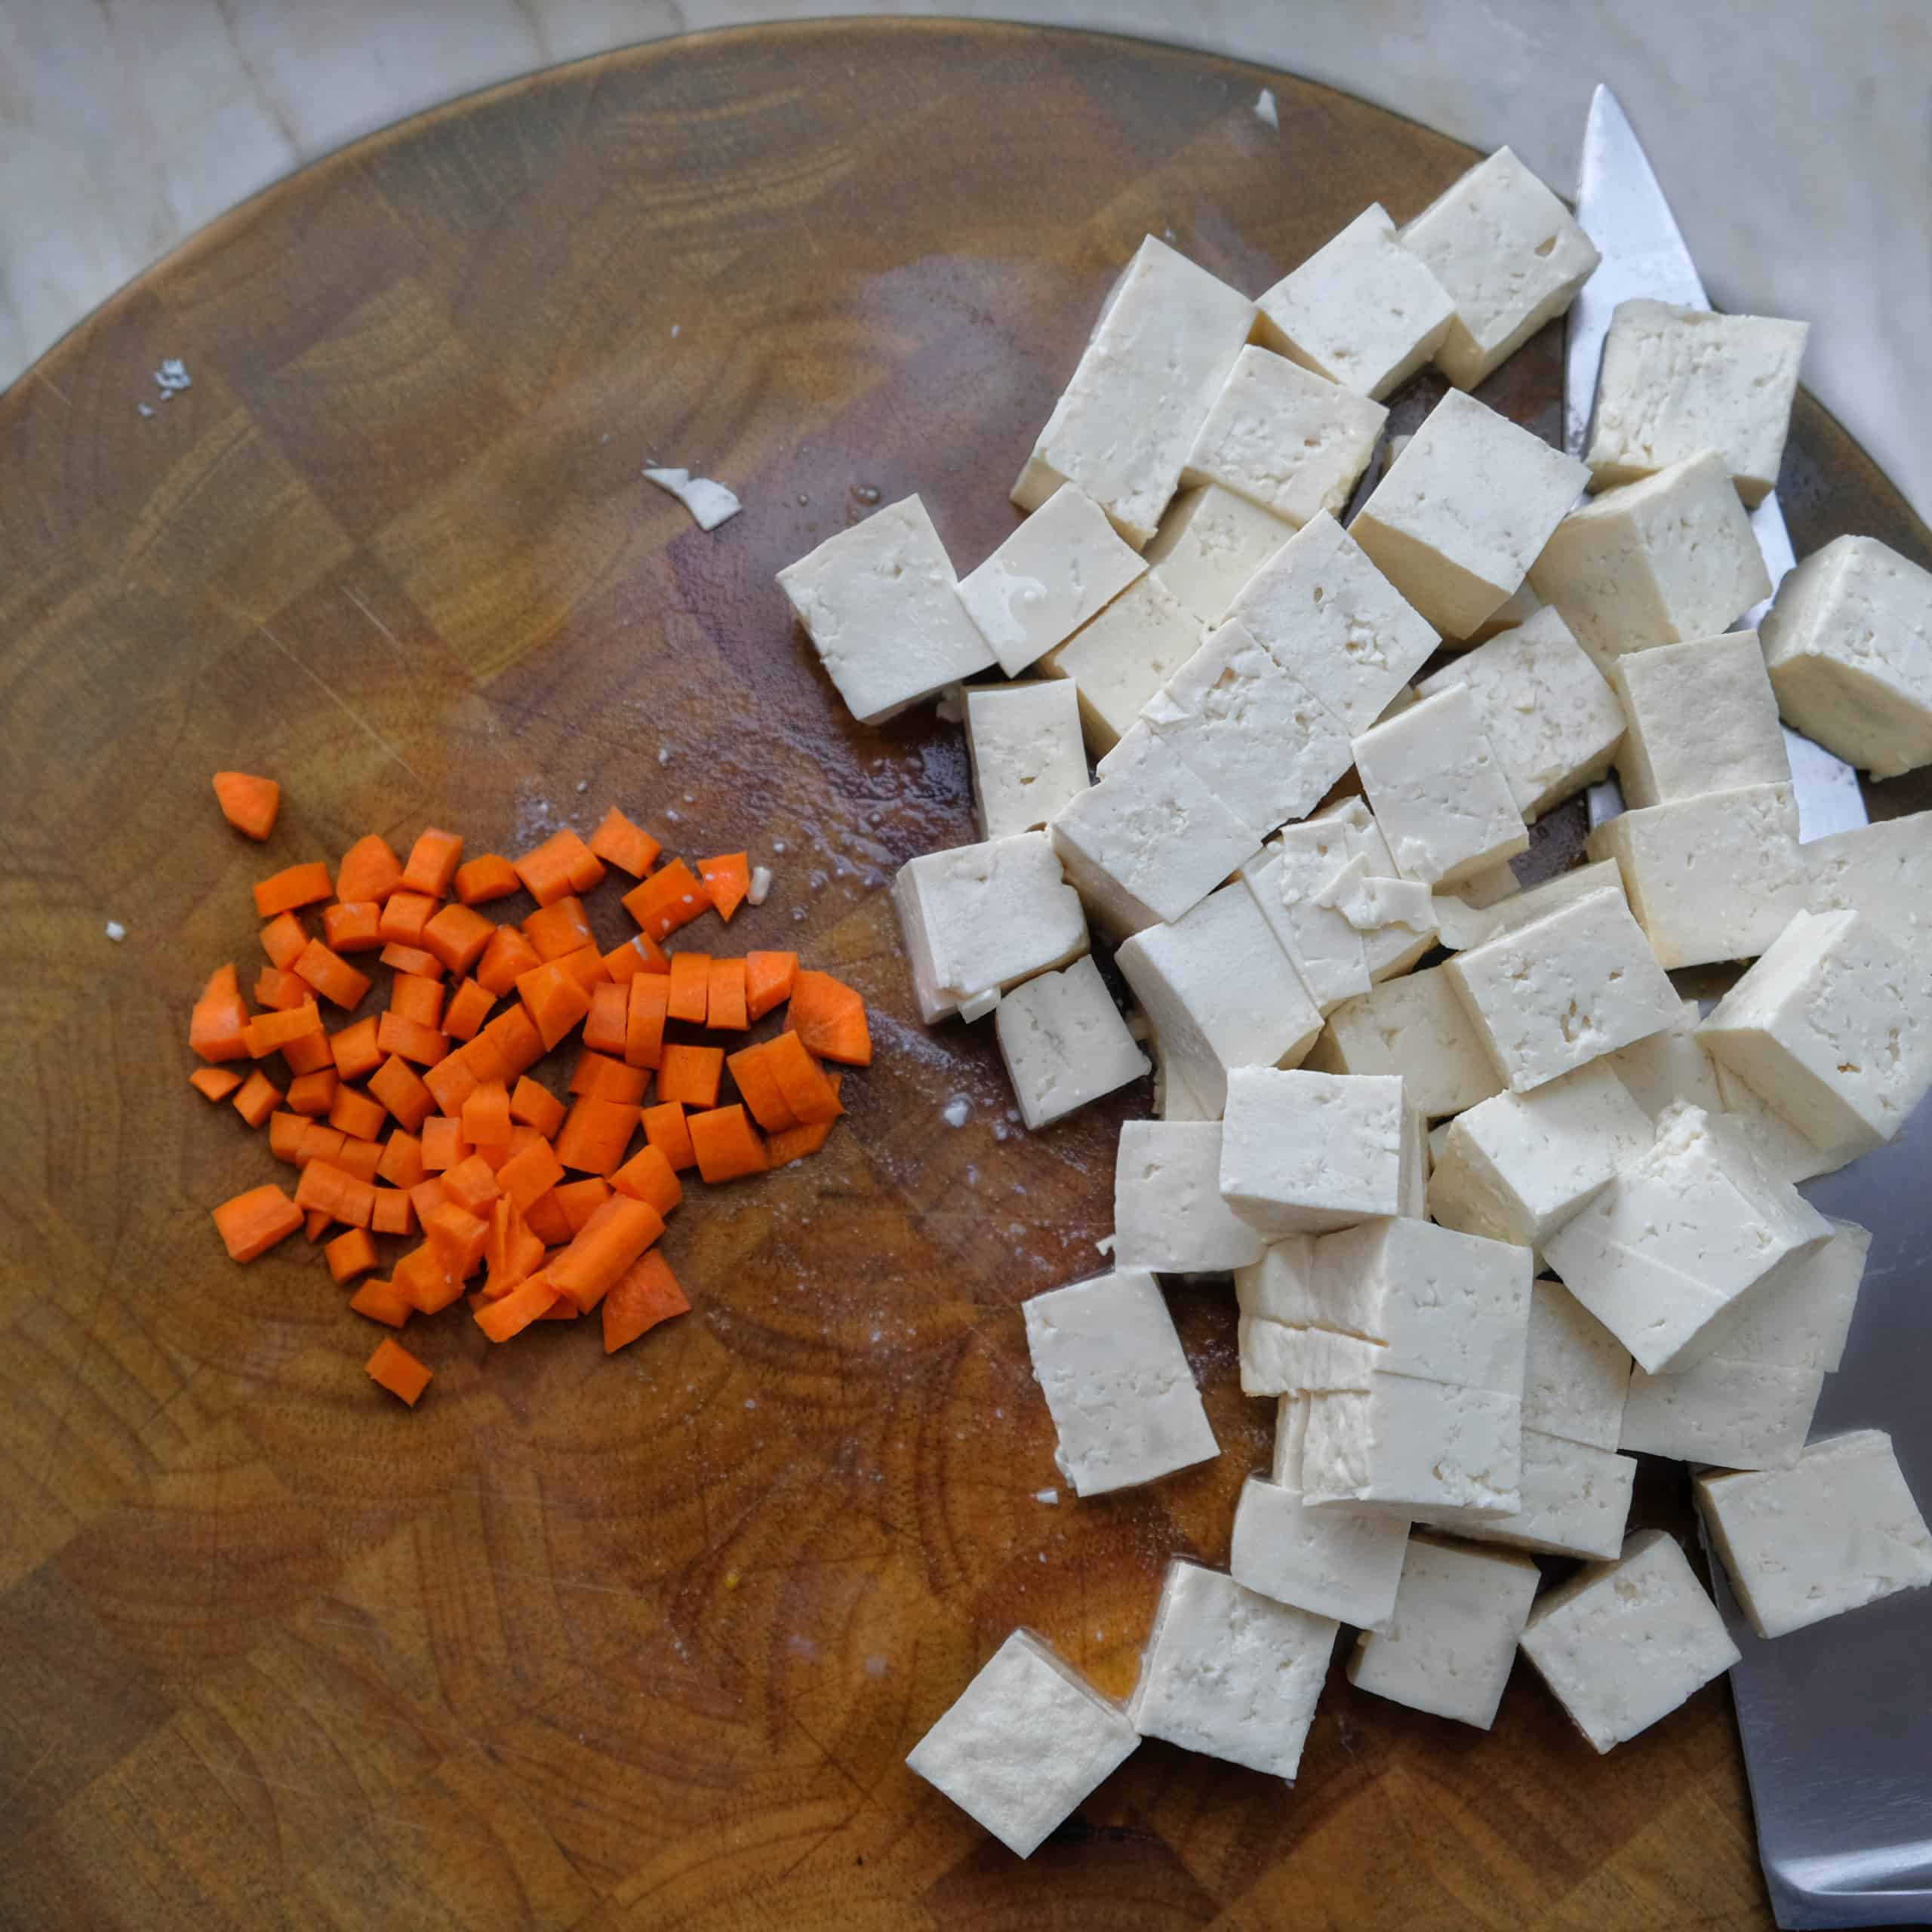 JAPANESE MAYO INGREDIENTS TOFU AND CARROT DICED